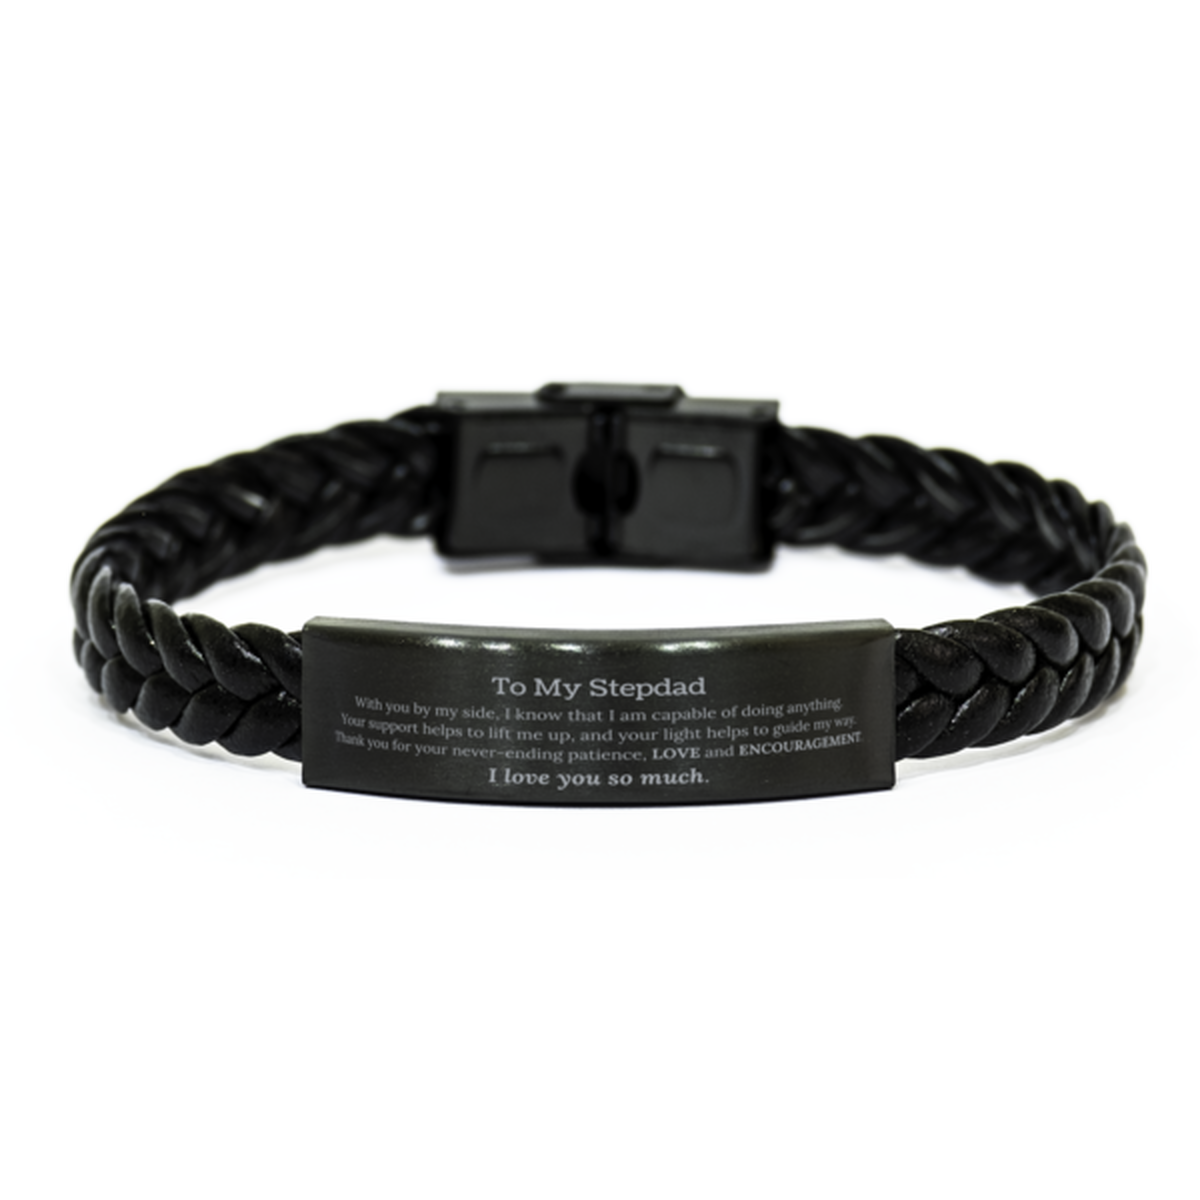 Appreciation Stepdad Braided Leather Bracelet Gifts, To My Stepdad Birthday Christmas Wedding Keepsake Gifts for Stepdad With you by my side, I know that I am capable of doing anything. I love you so much